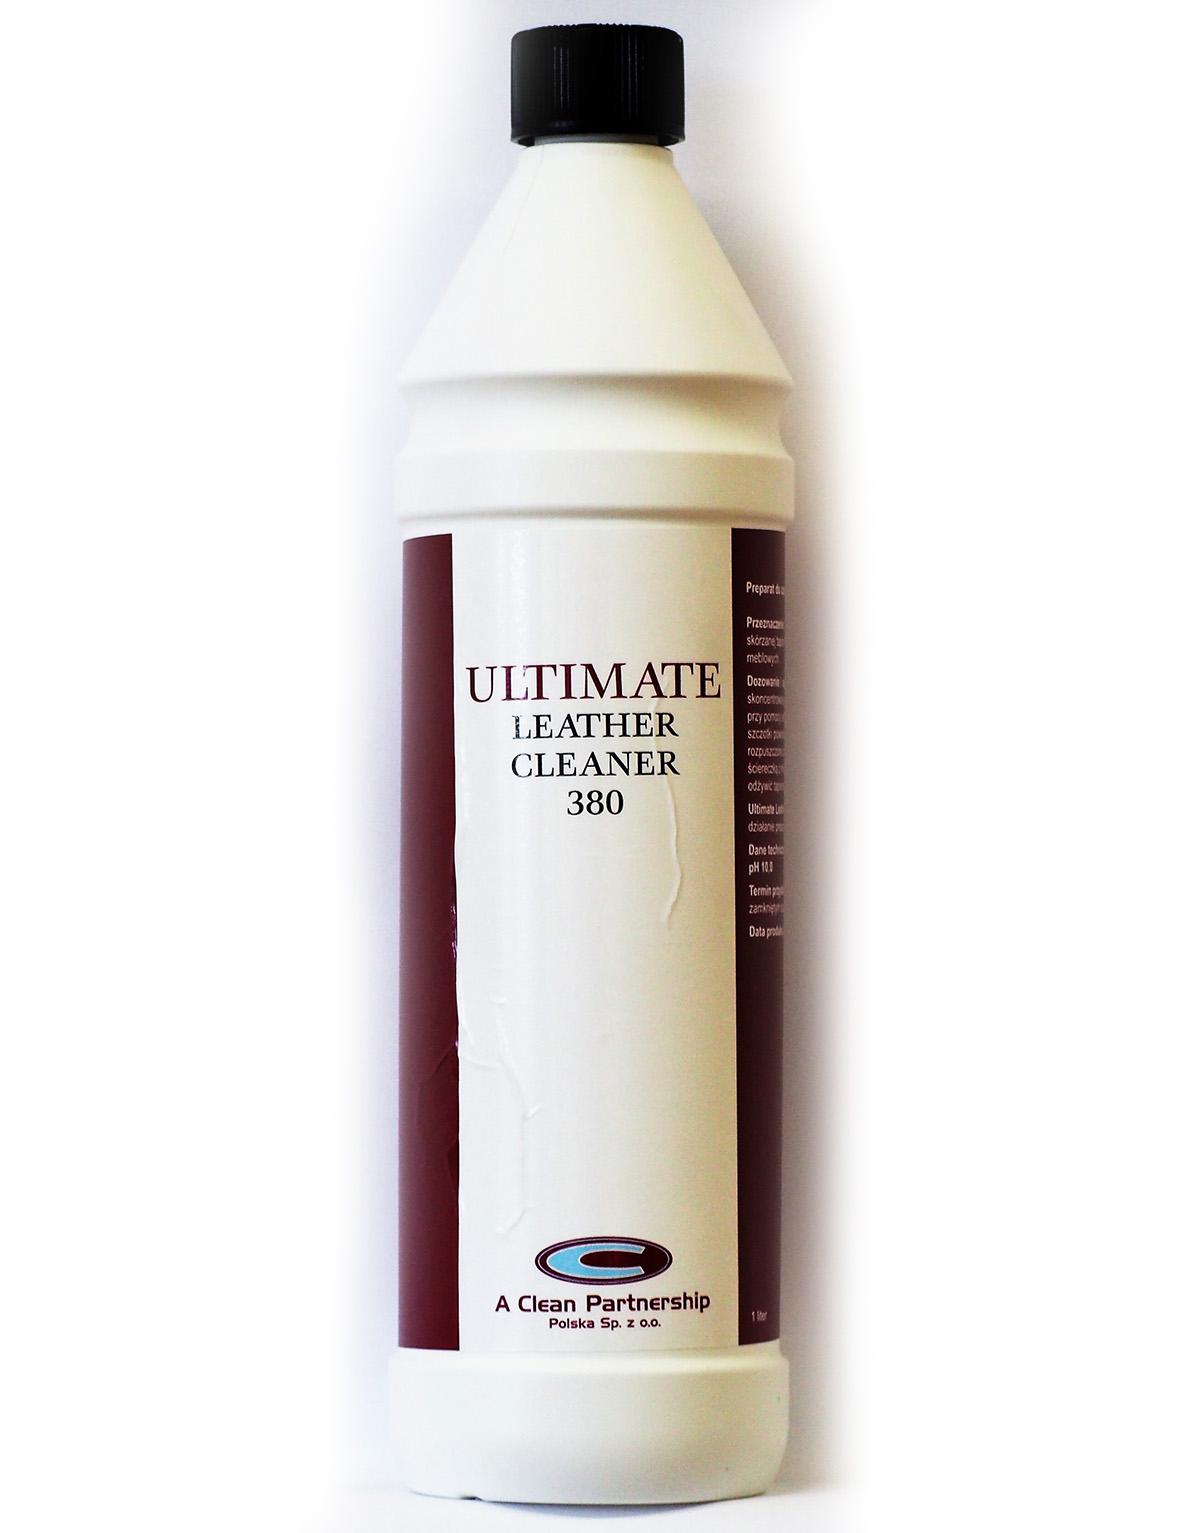 Ultimate leather cleaner 380